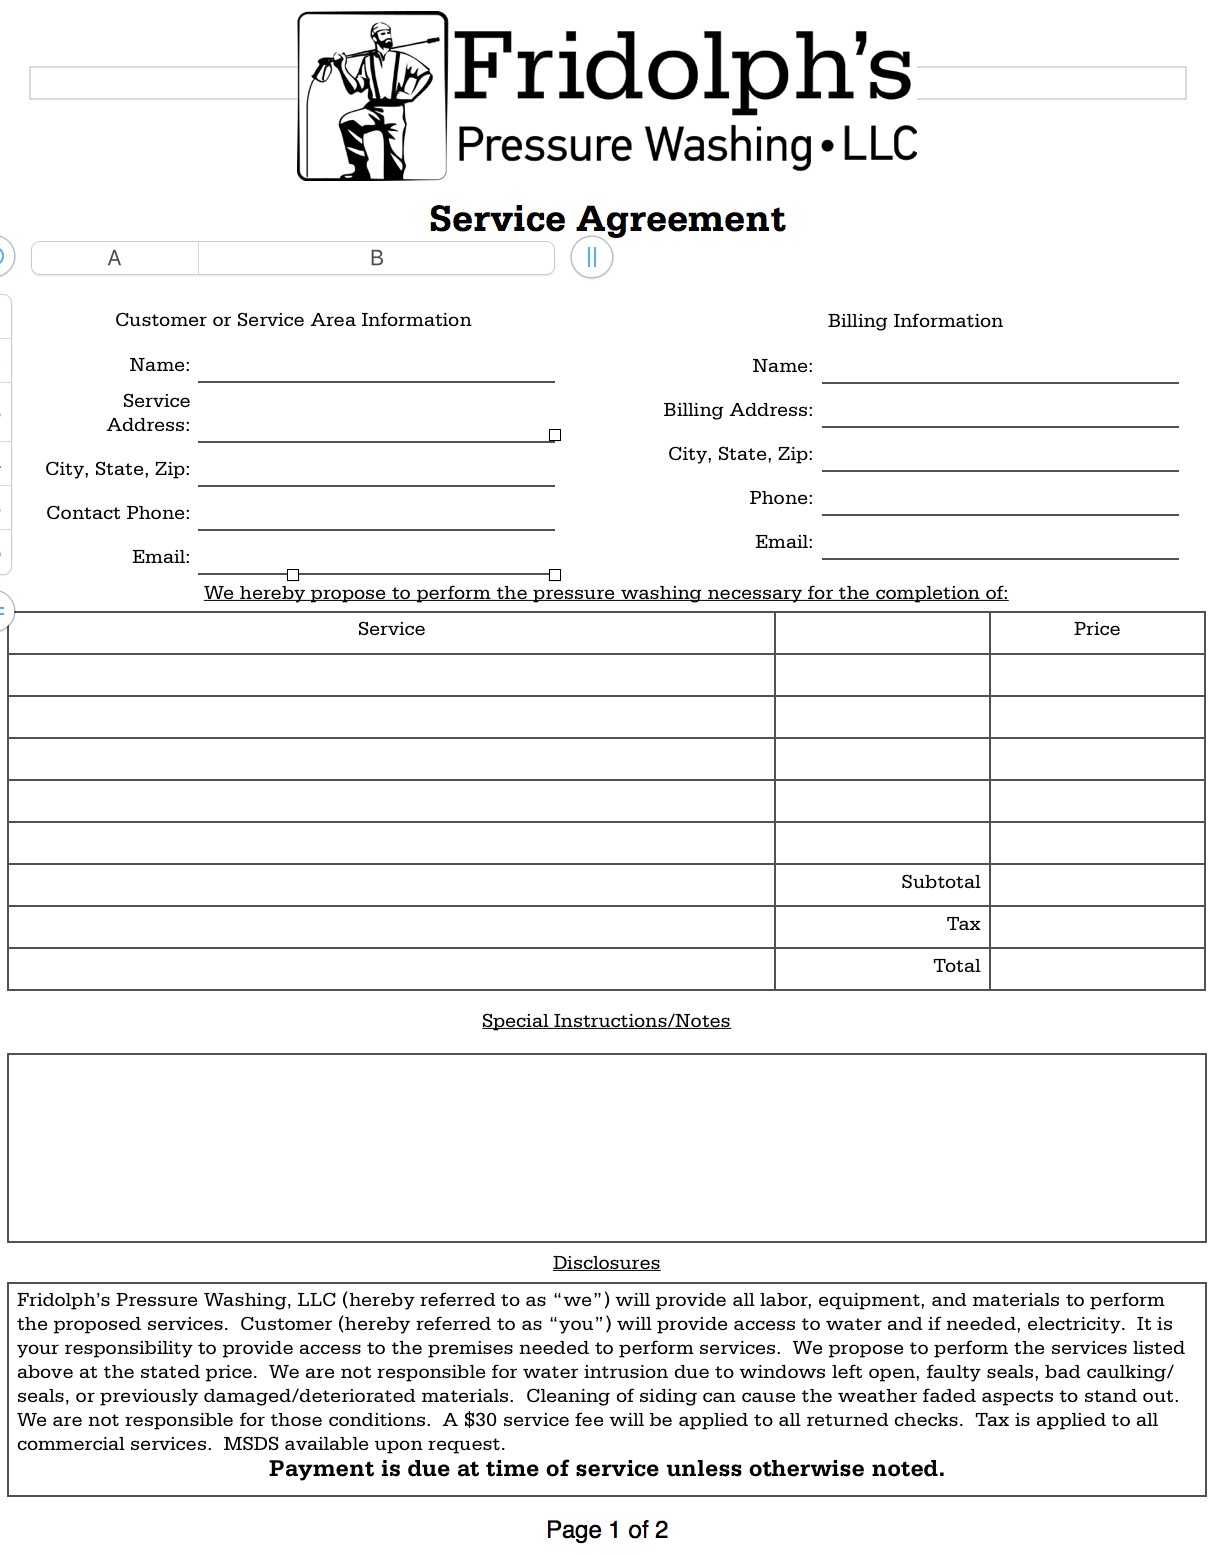 Service Agreement Residential Pressure Washing Resource Document Contract Forms